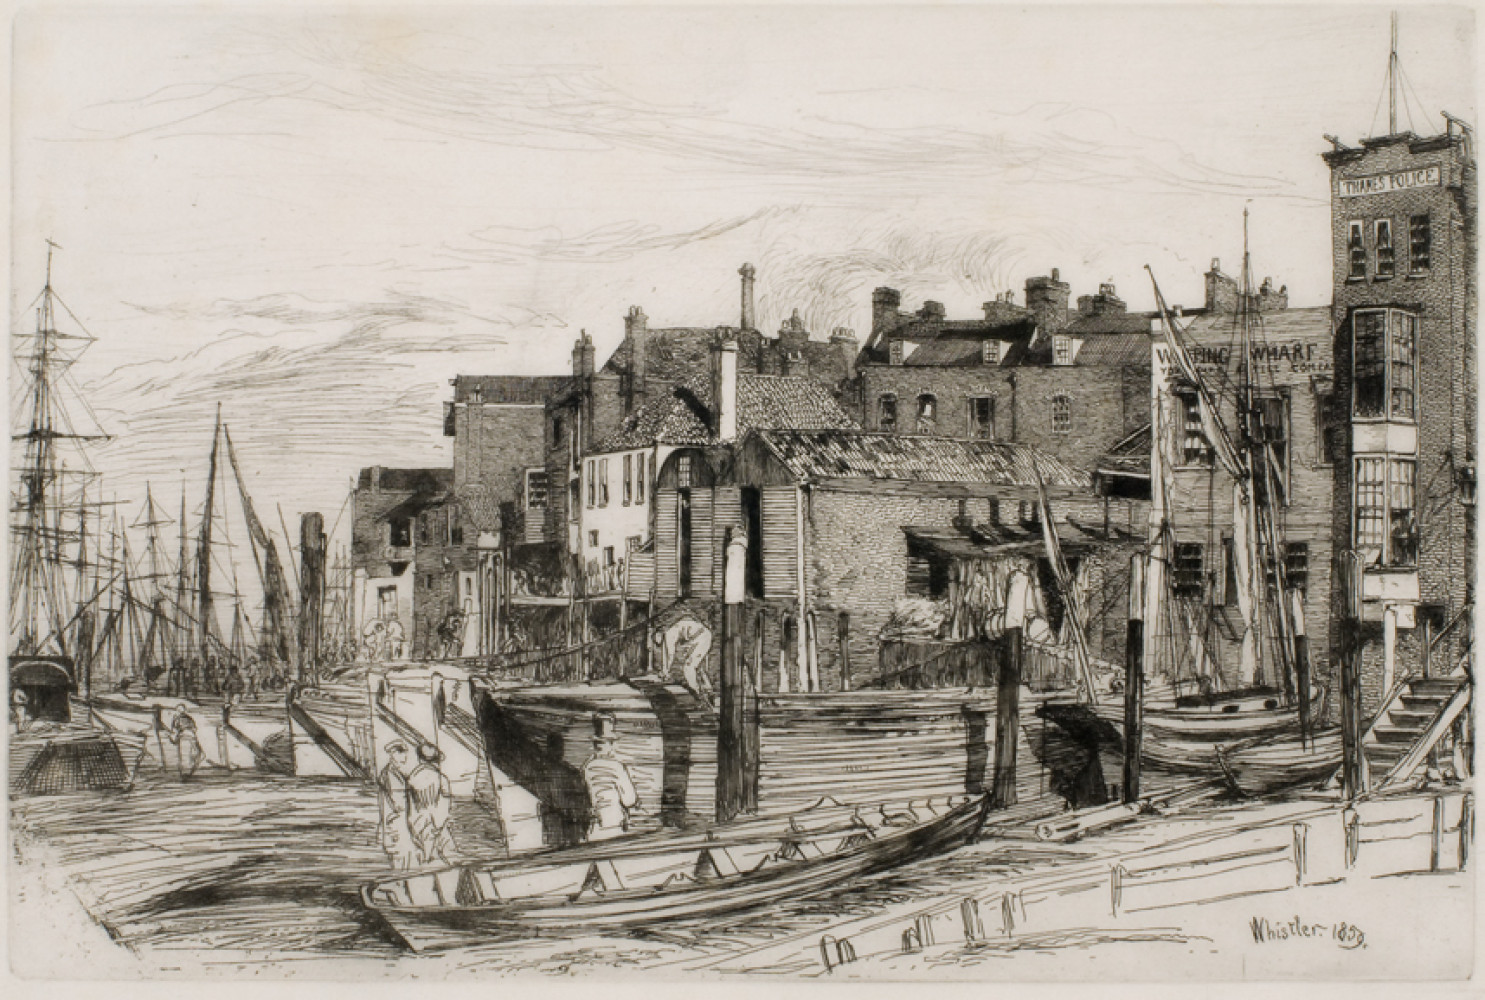 Thames Police, 1859, by James McNeill Whistler (American, 1834-1903); etching on paper; 6 x 8 7/8 inches; Gift of Dr. and Mrs. (Caroline) Anton Vreede; 2004.004.0006